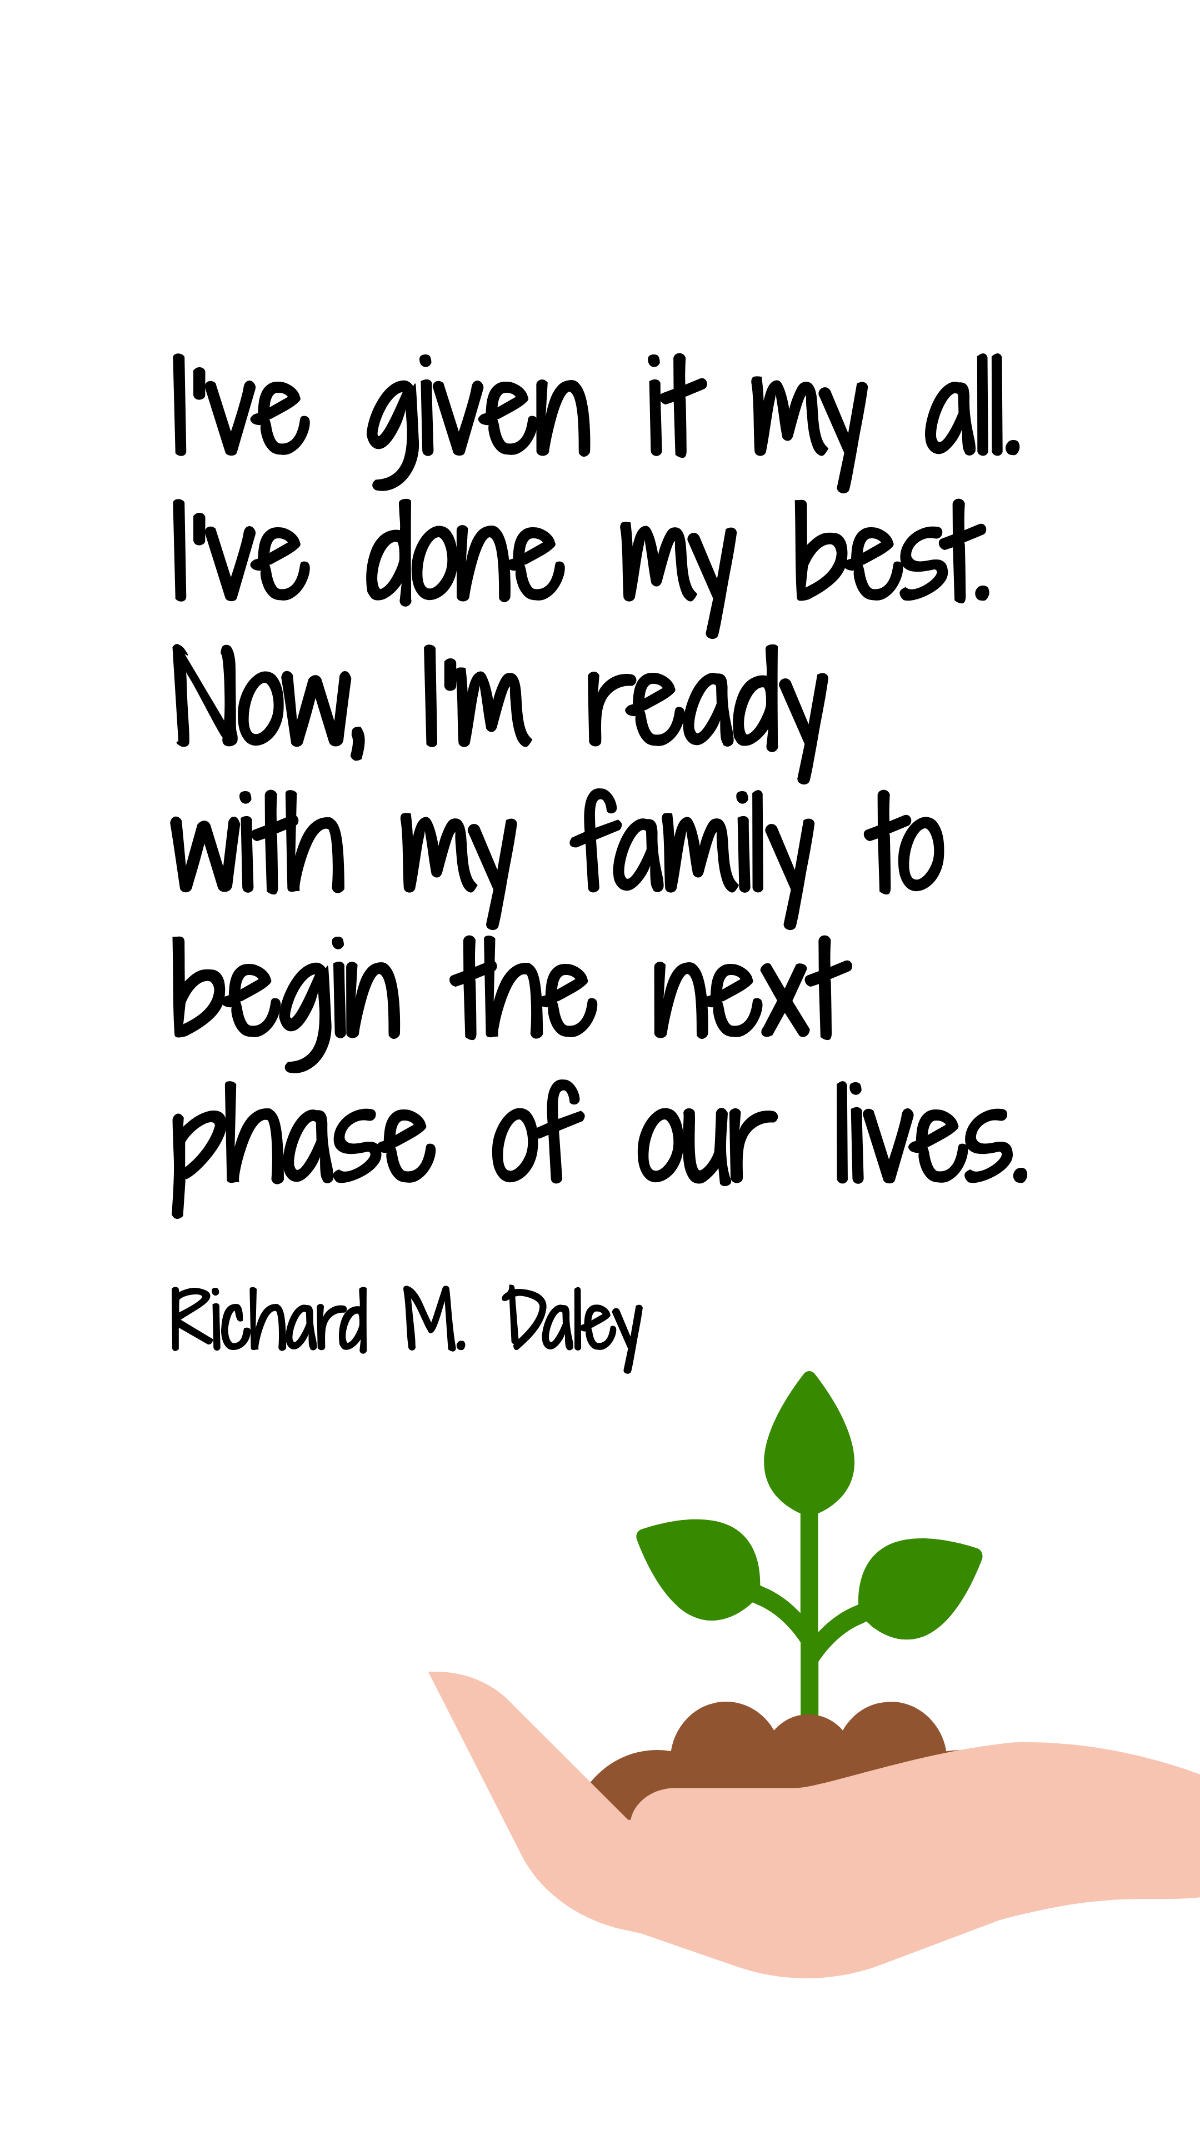 Richard M. Daley - I've given it my all. I've done my best. Now, I'm ready with my family to begin the next phase of our lives. Template